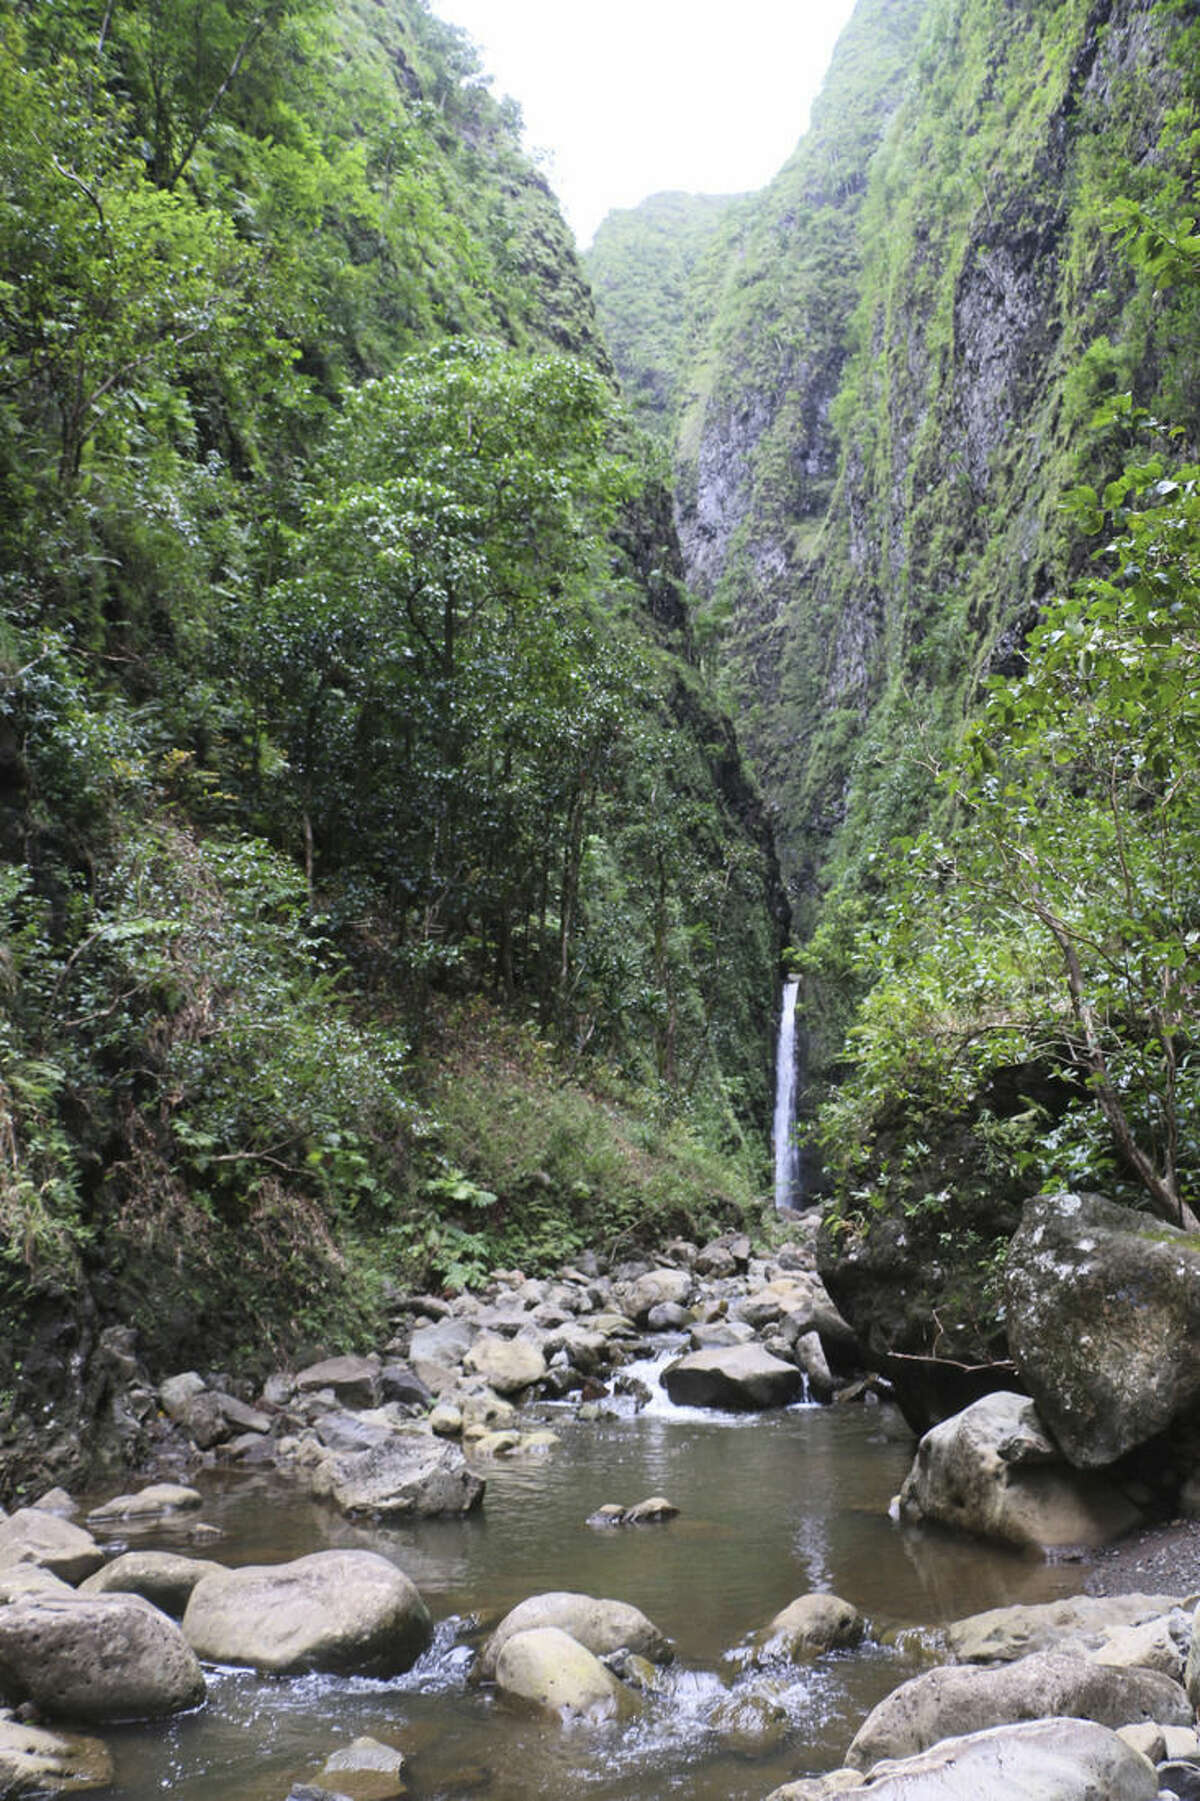 This Oct. 11, 2014 photo provided by the Hawaii state Department of Land and Natural Resources shows Sacred Falls in Hauula, Hawaii. The state is pushing back against hikers who continue to illegally visit the waterfall in a closed state park with an online video showing people being cited for trespassing. (AP Photo/Hawaii State Department of Land and Natural Resources, Dan Dennison)